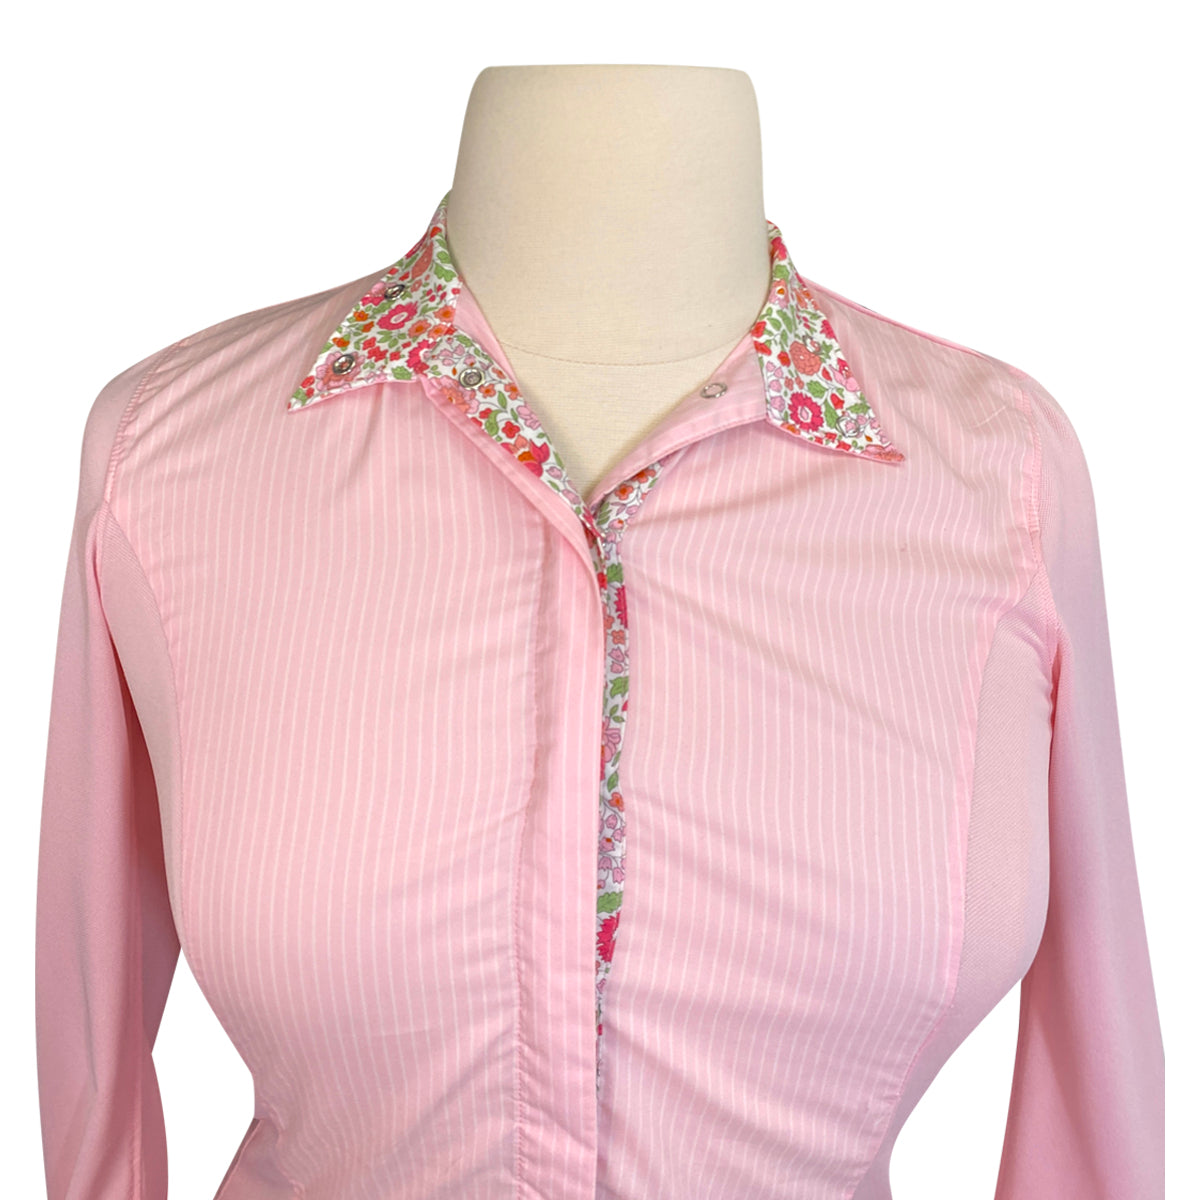 Ariat Pro Series Show Shirt in Pink w/Floral Pattern